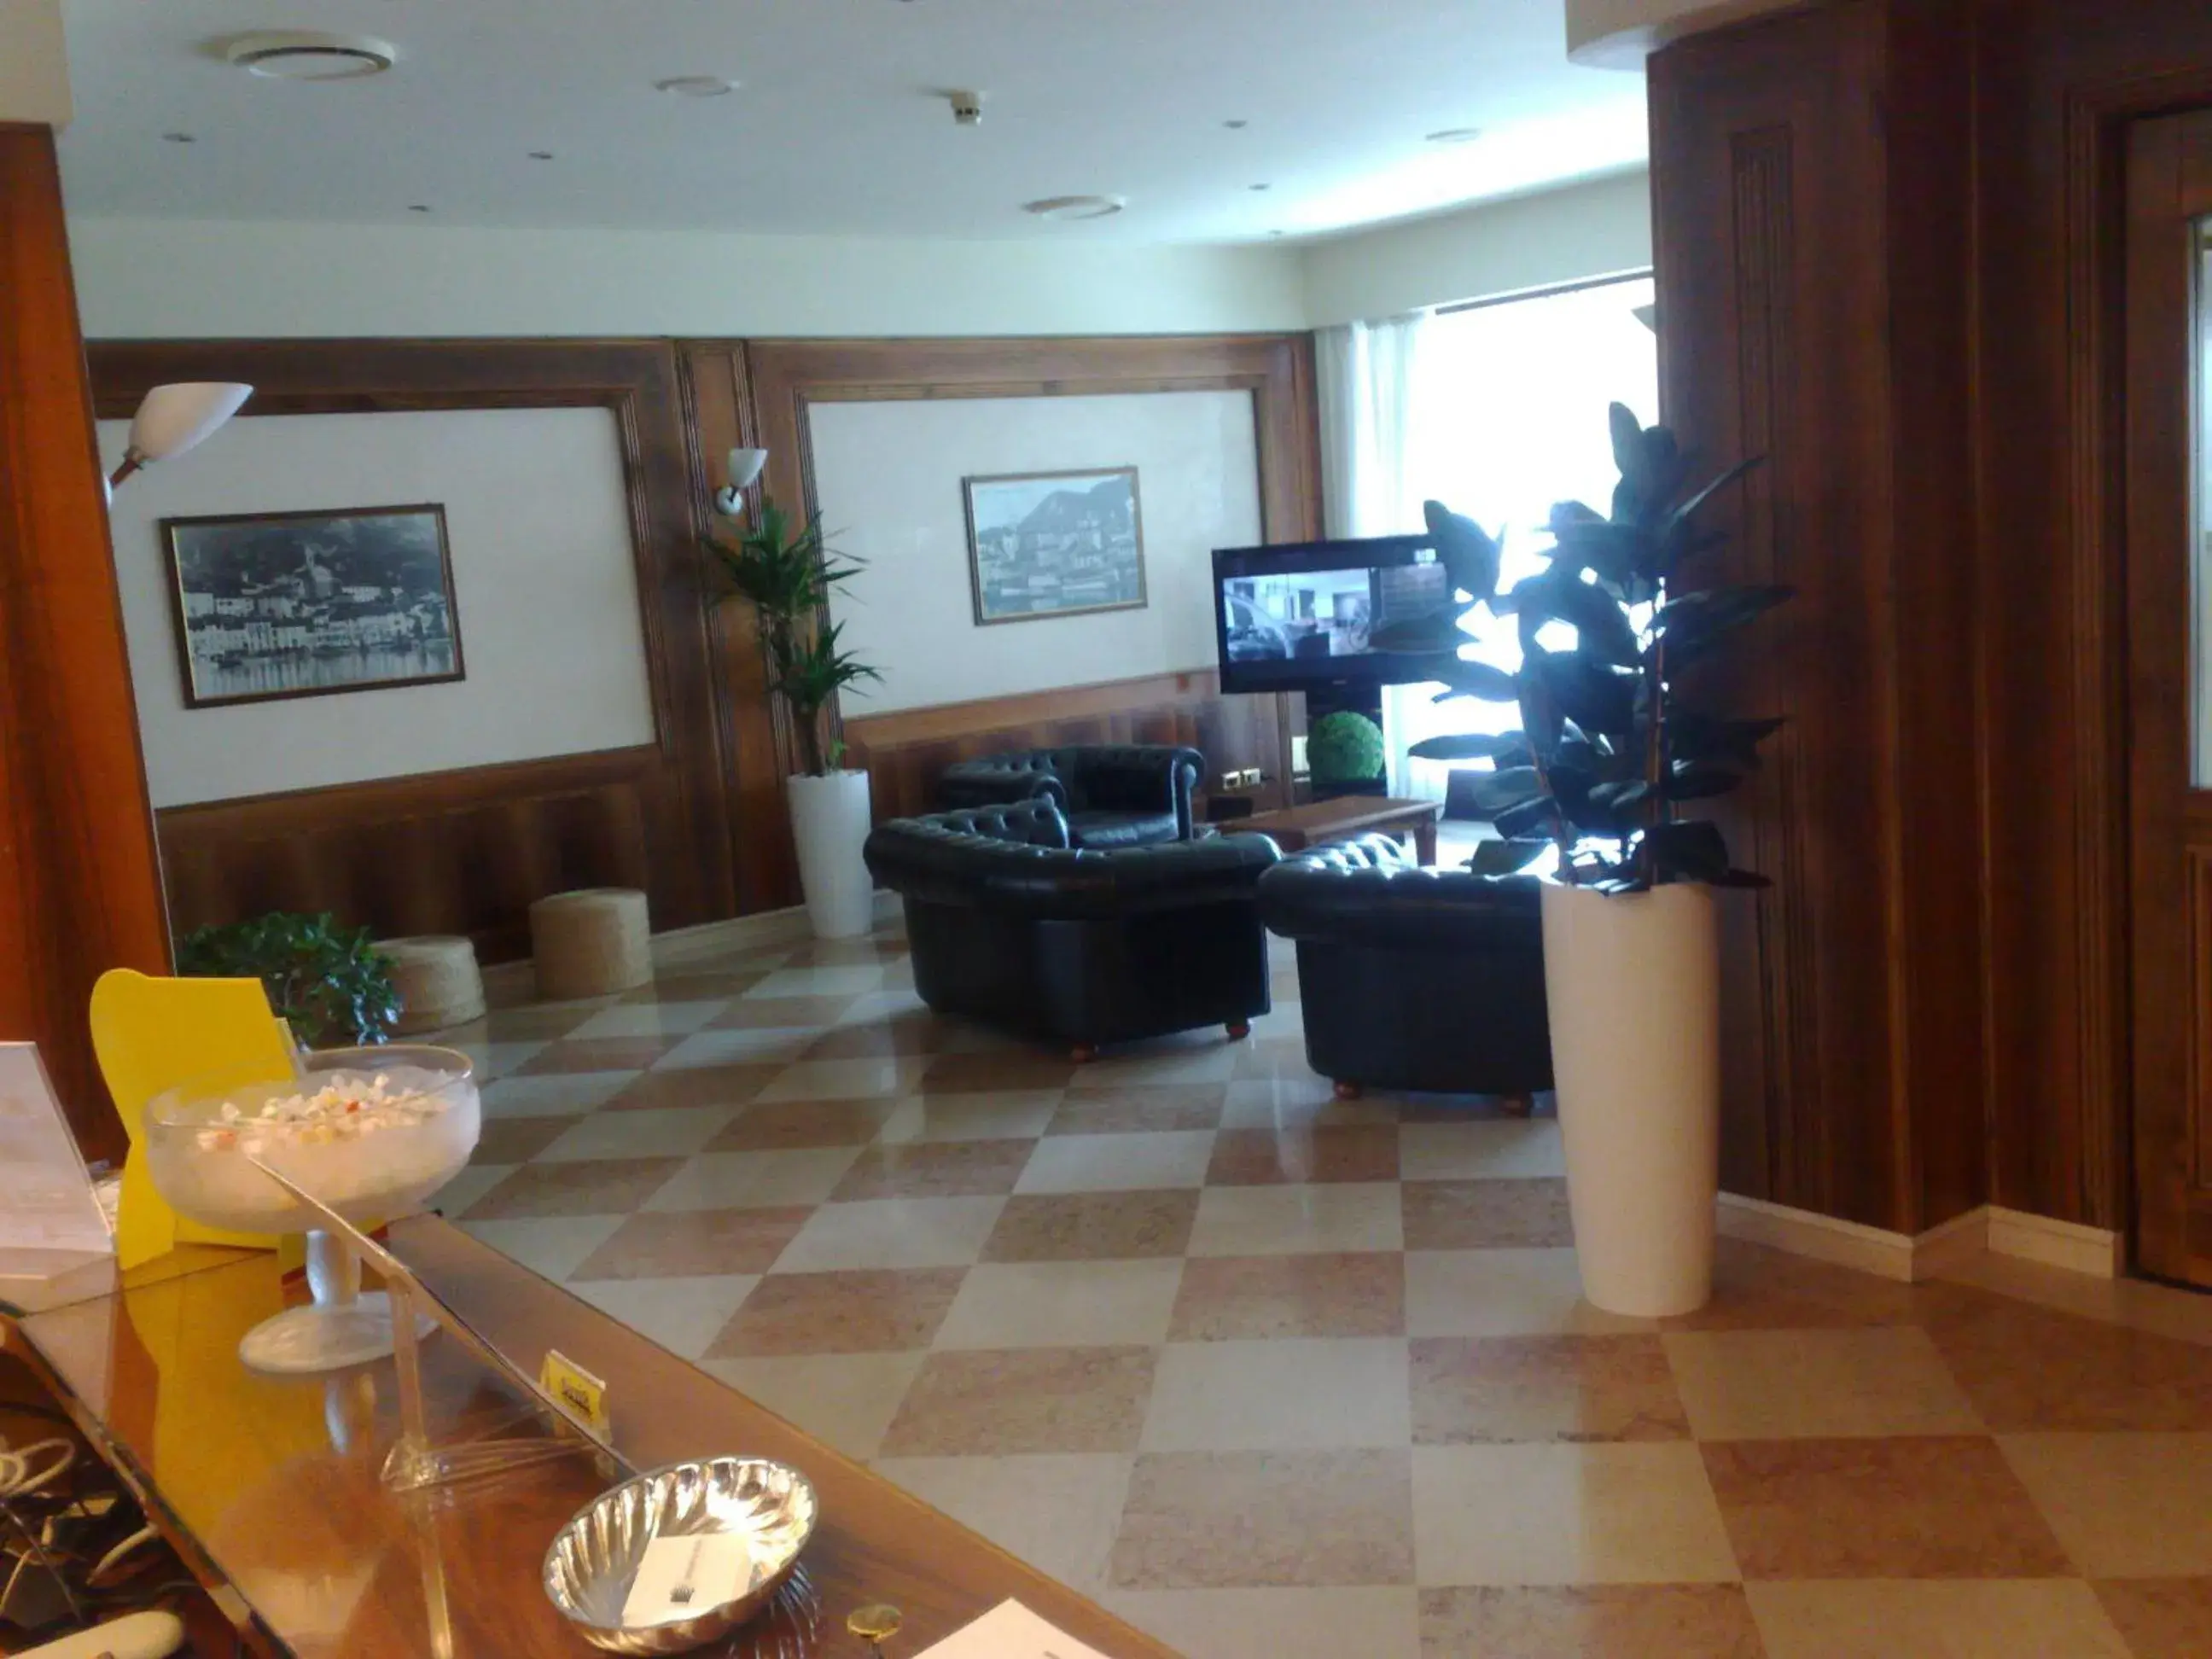 Lobby or reception in Continental Hotel